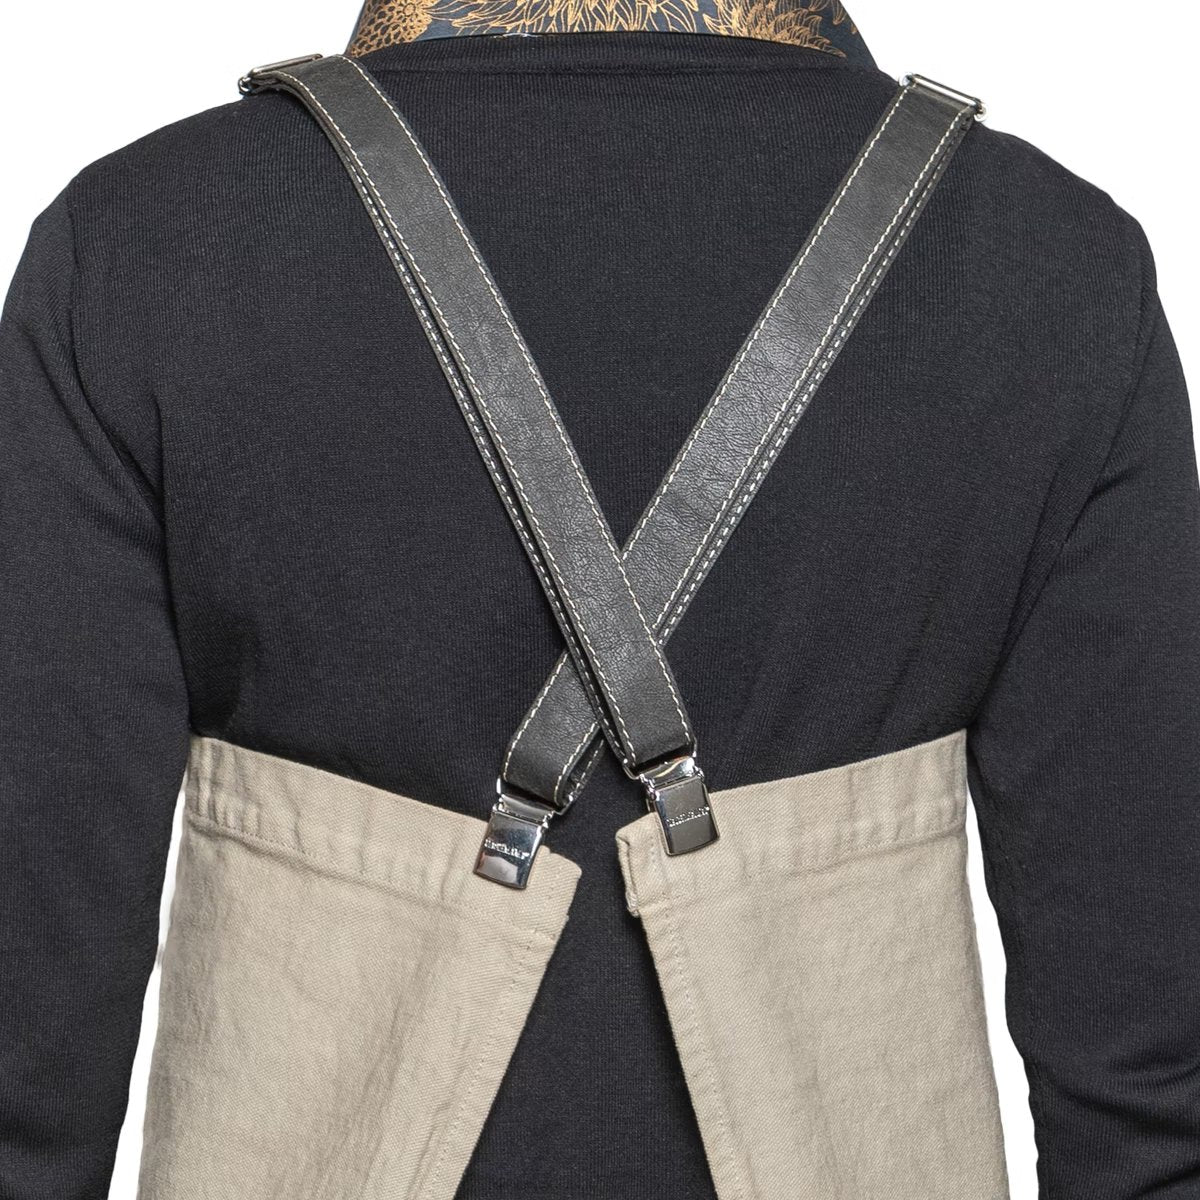 A person is shown from the back wearing a black long-sleeved t-shirt and a washable paper apron with washable paper and metal clip straps. The apron is beige in colour.